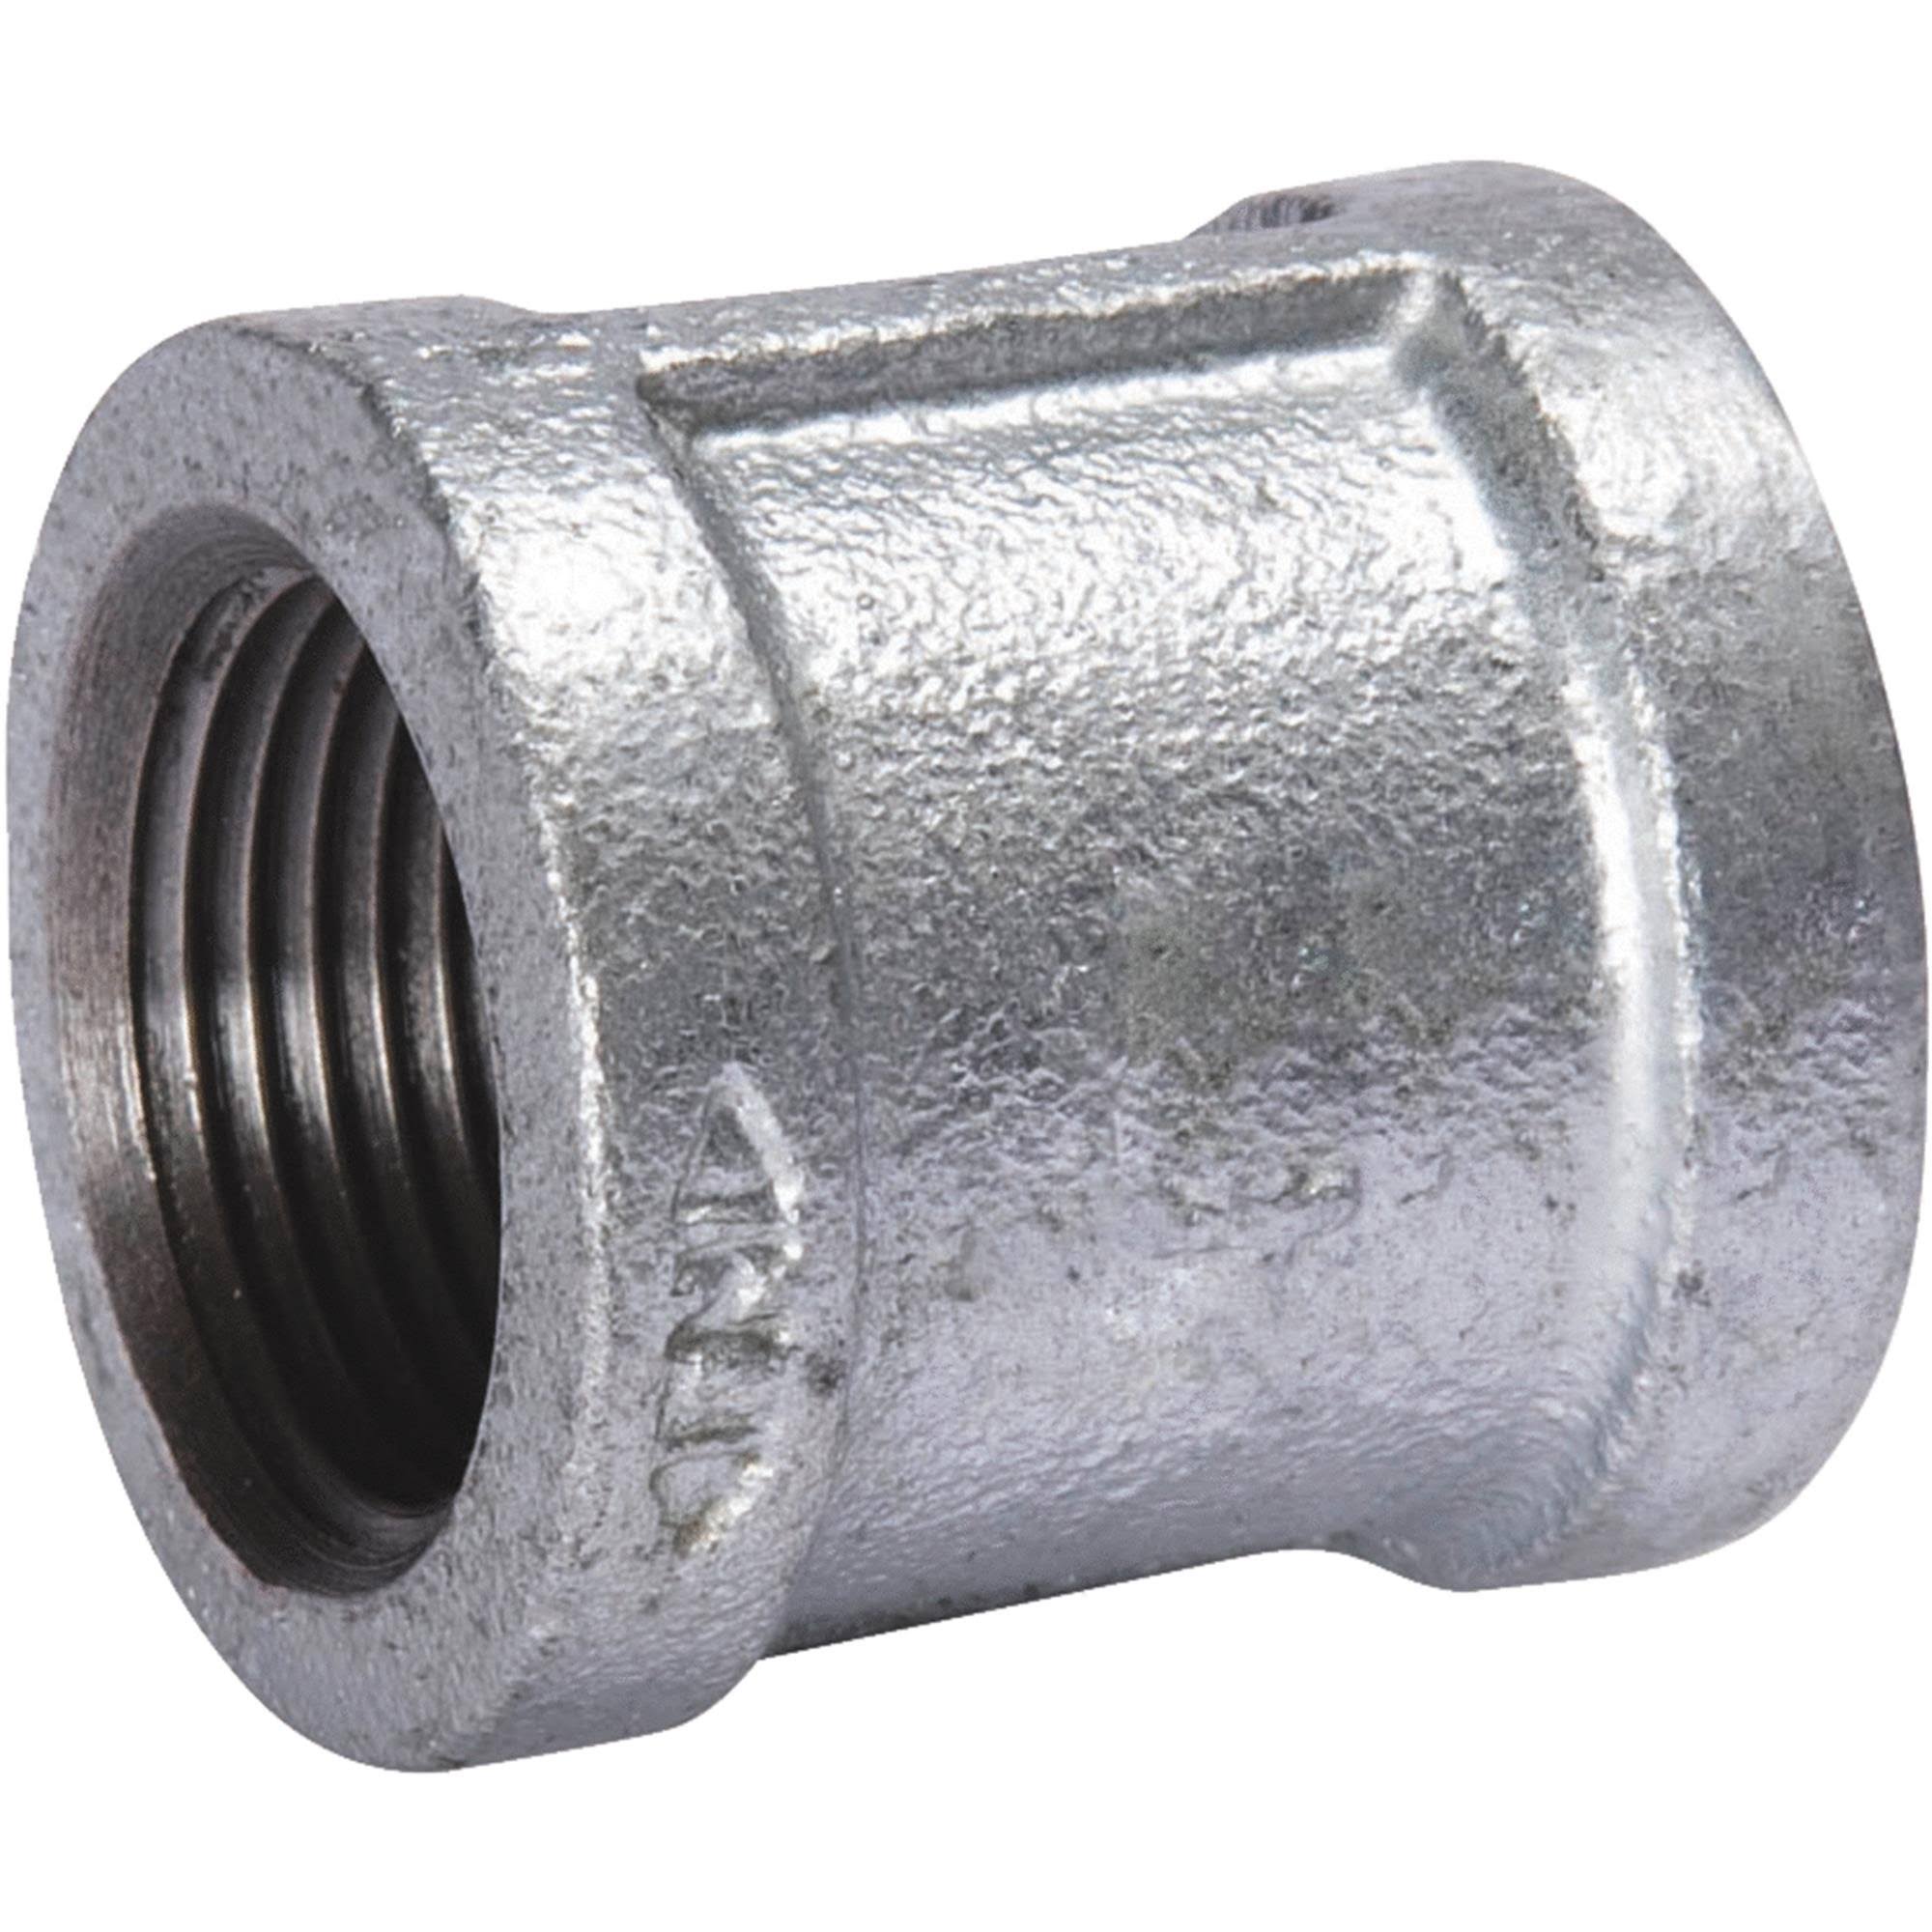 B and K Malleable Galvanized Iron Coupling - 1" Fip, 5 Pack